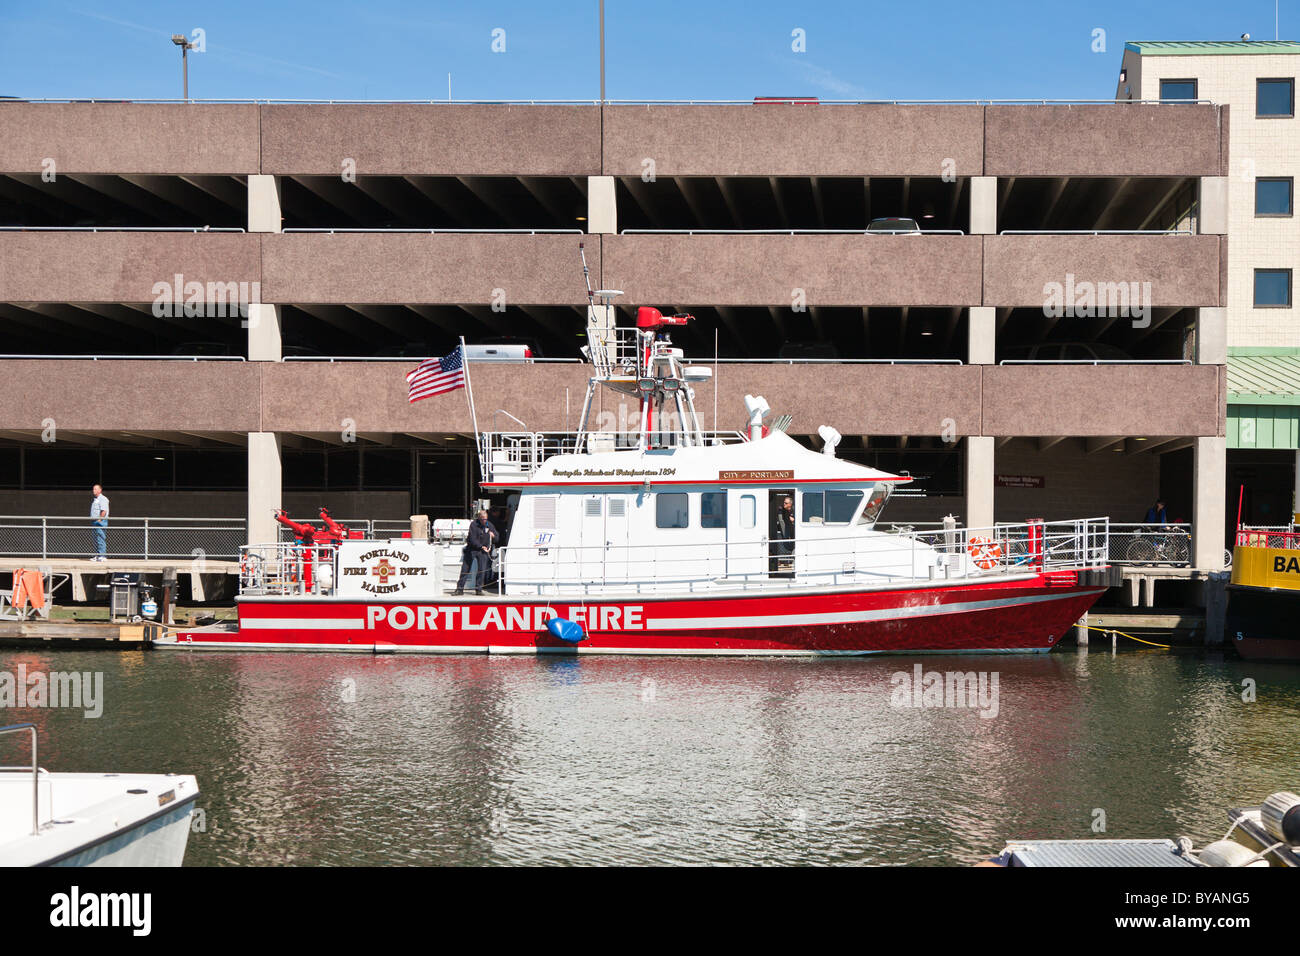 City of Portland, Maine Fire Department boat, Marine 1 docked in front of parking garage Stock Photo